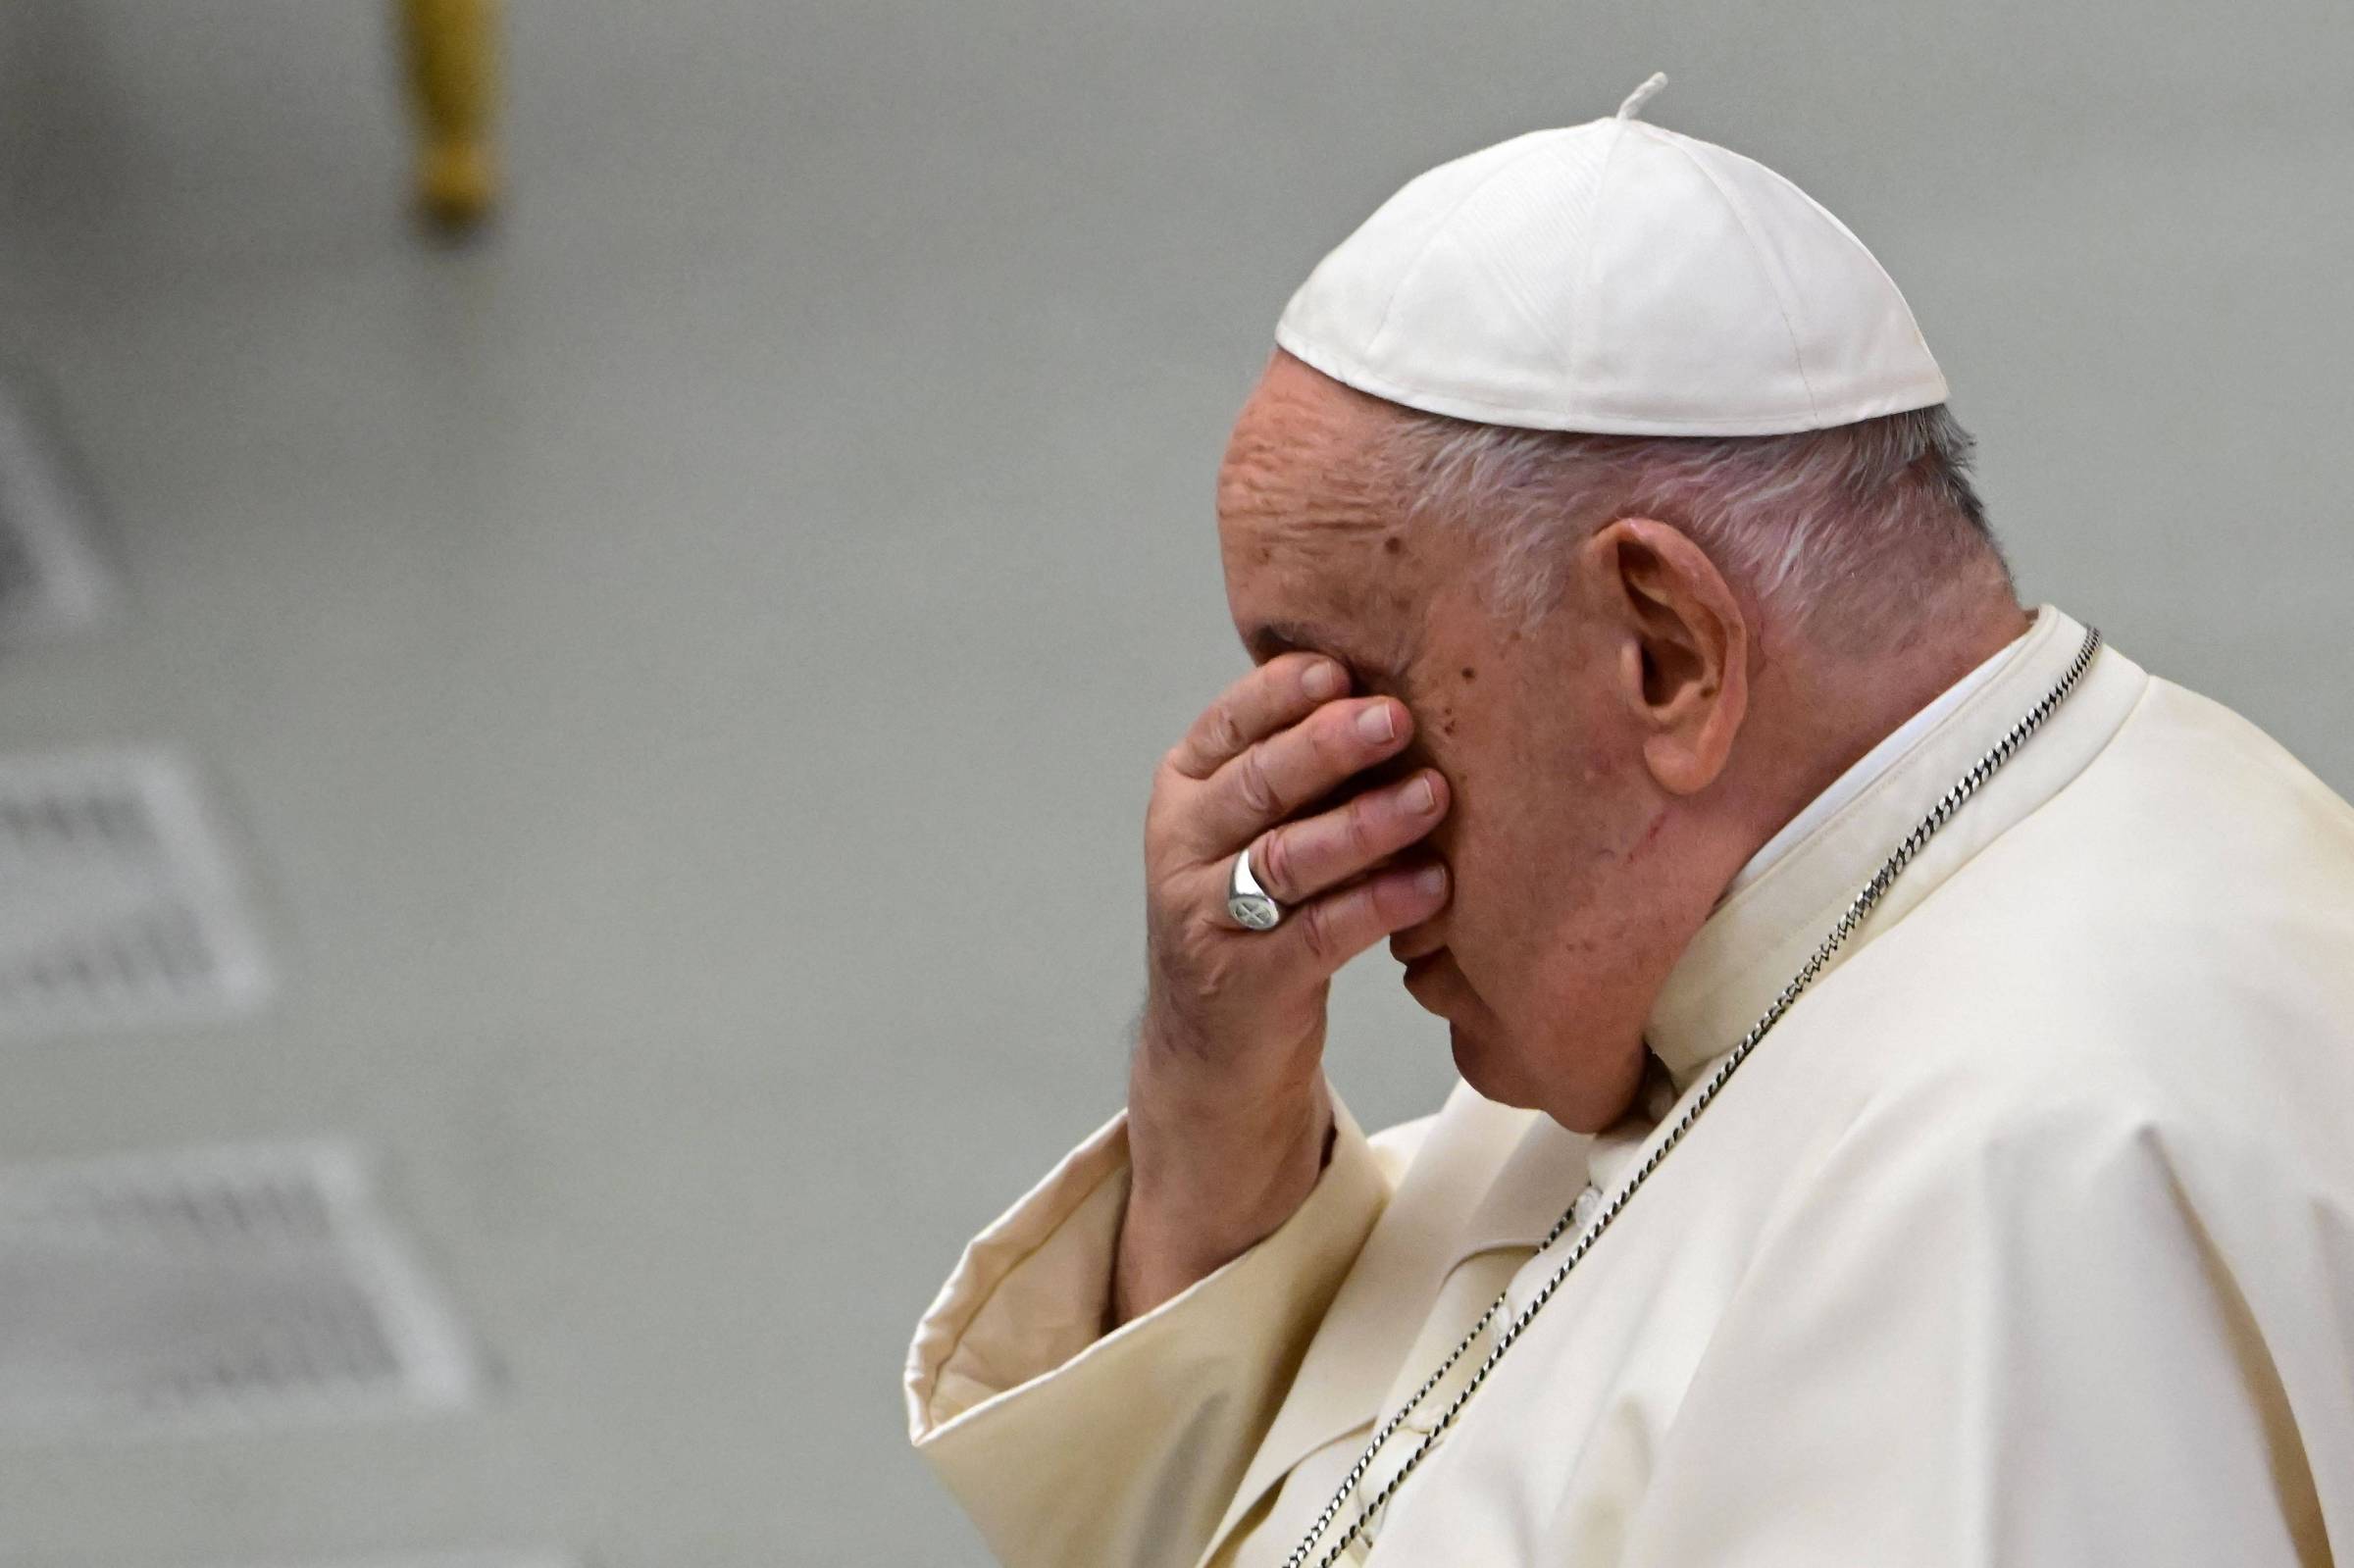 Opinion – Ross Douthat: Pope Francis’ reckoning is a long and unstable rift in the church